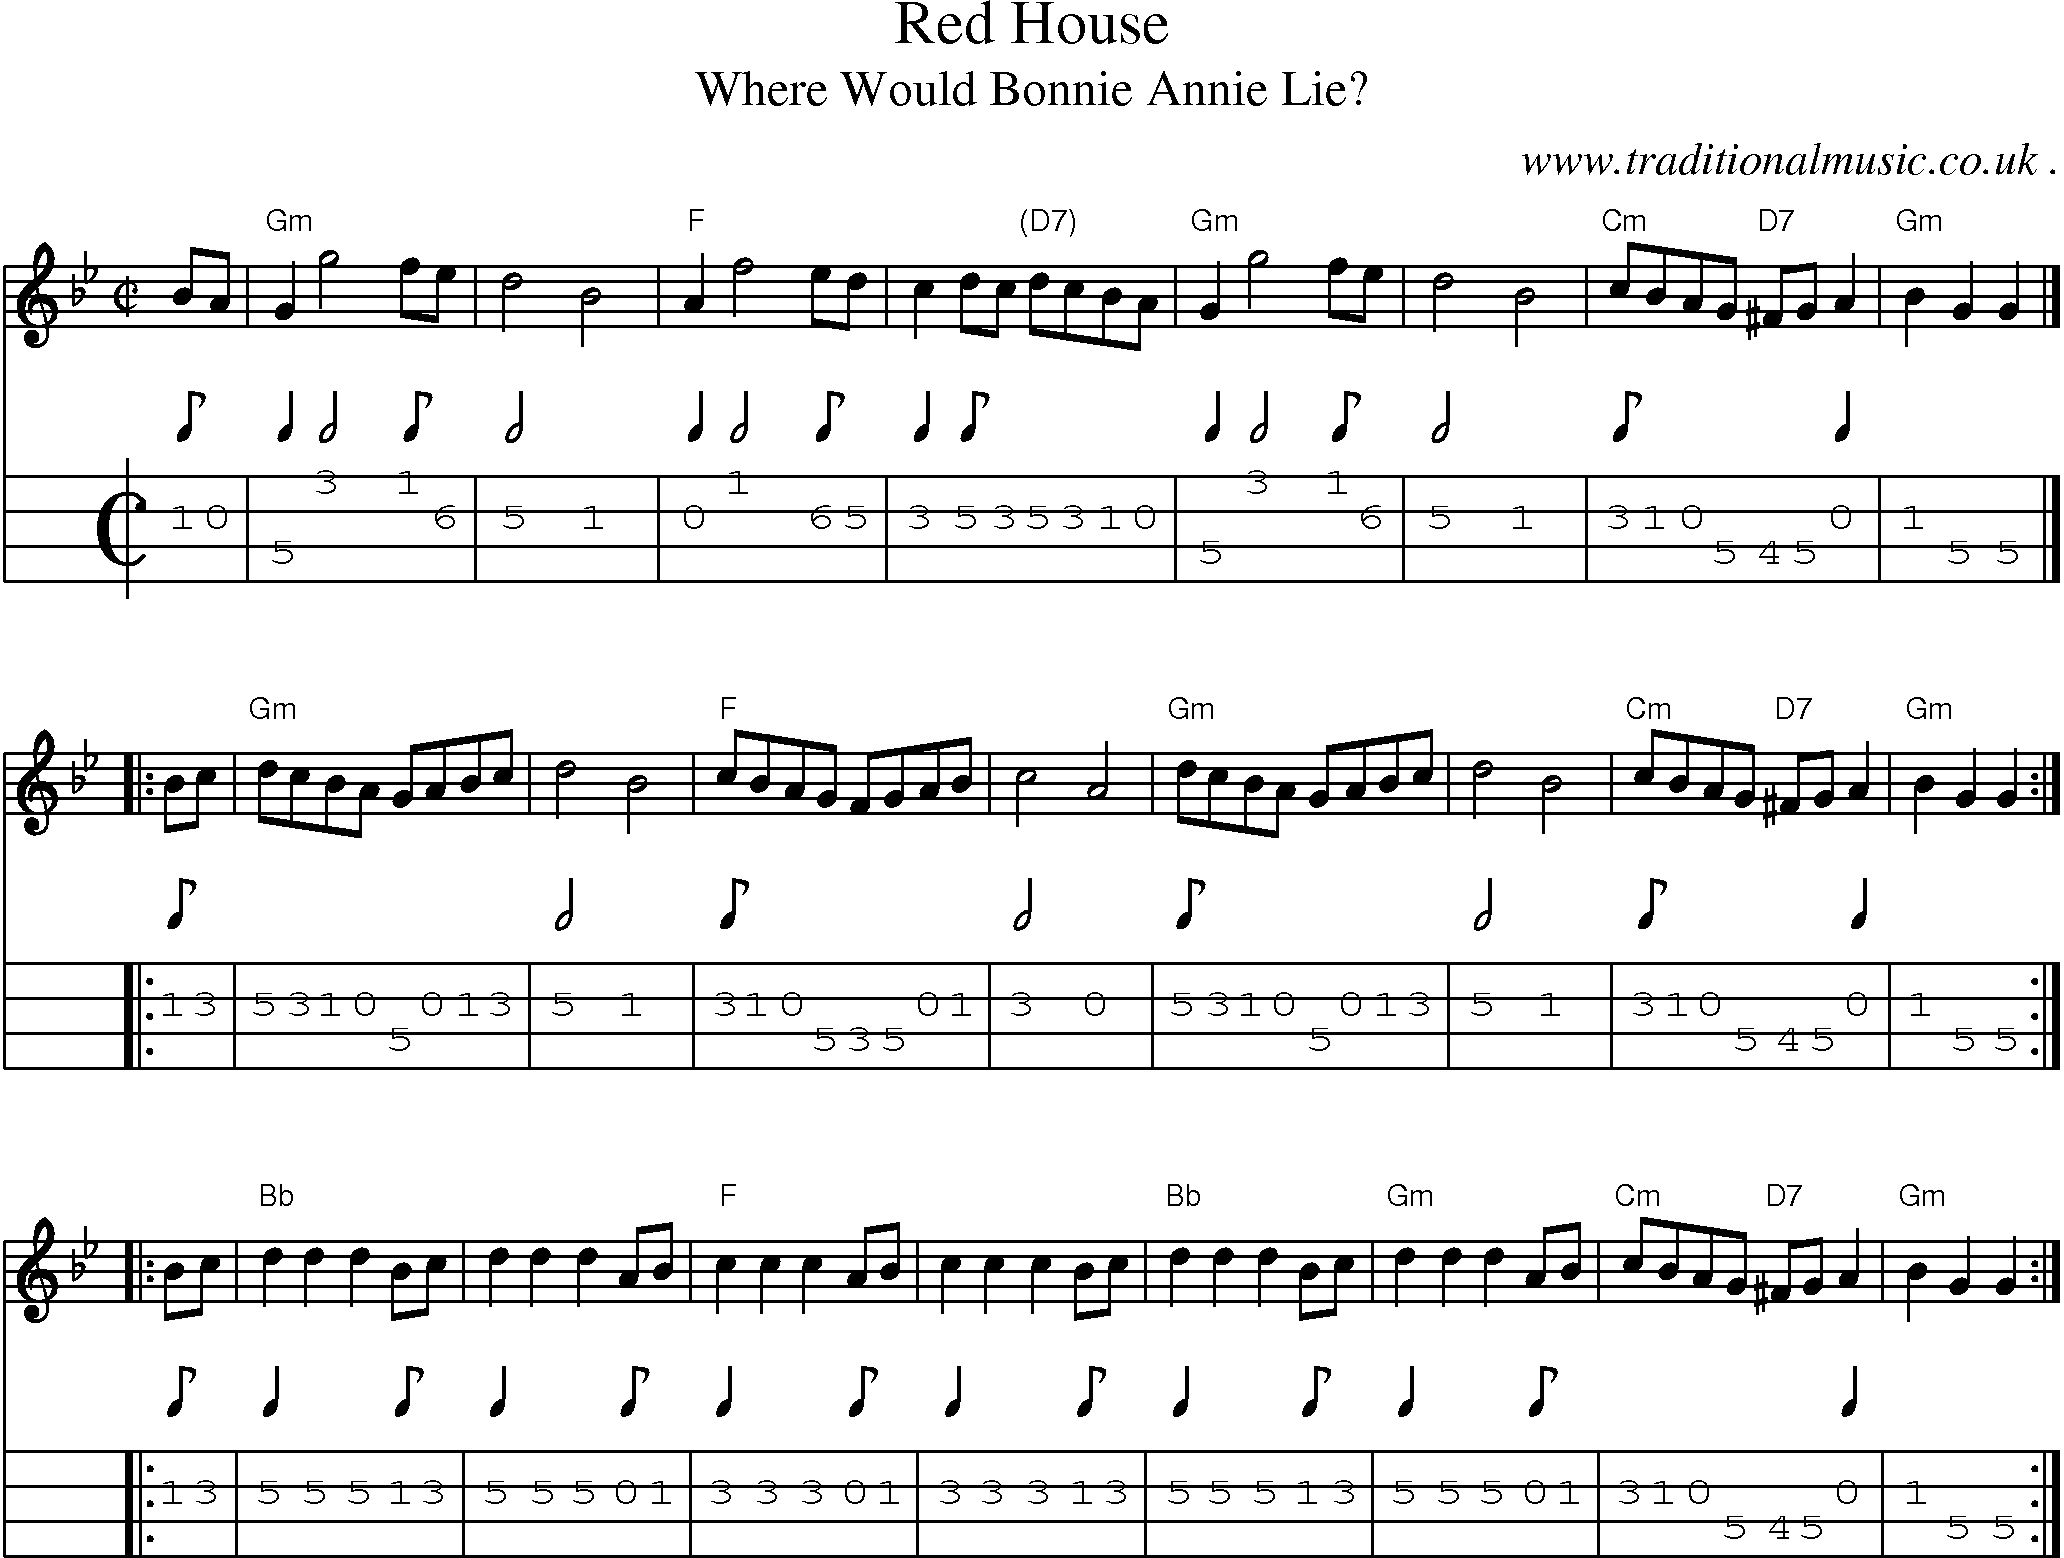 Sheet-music  score, Chords and Mandolin Tabs for Red House